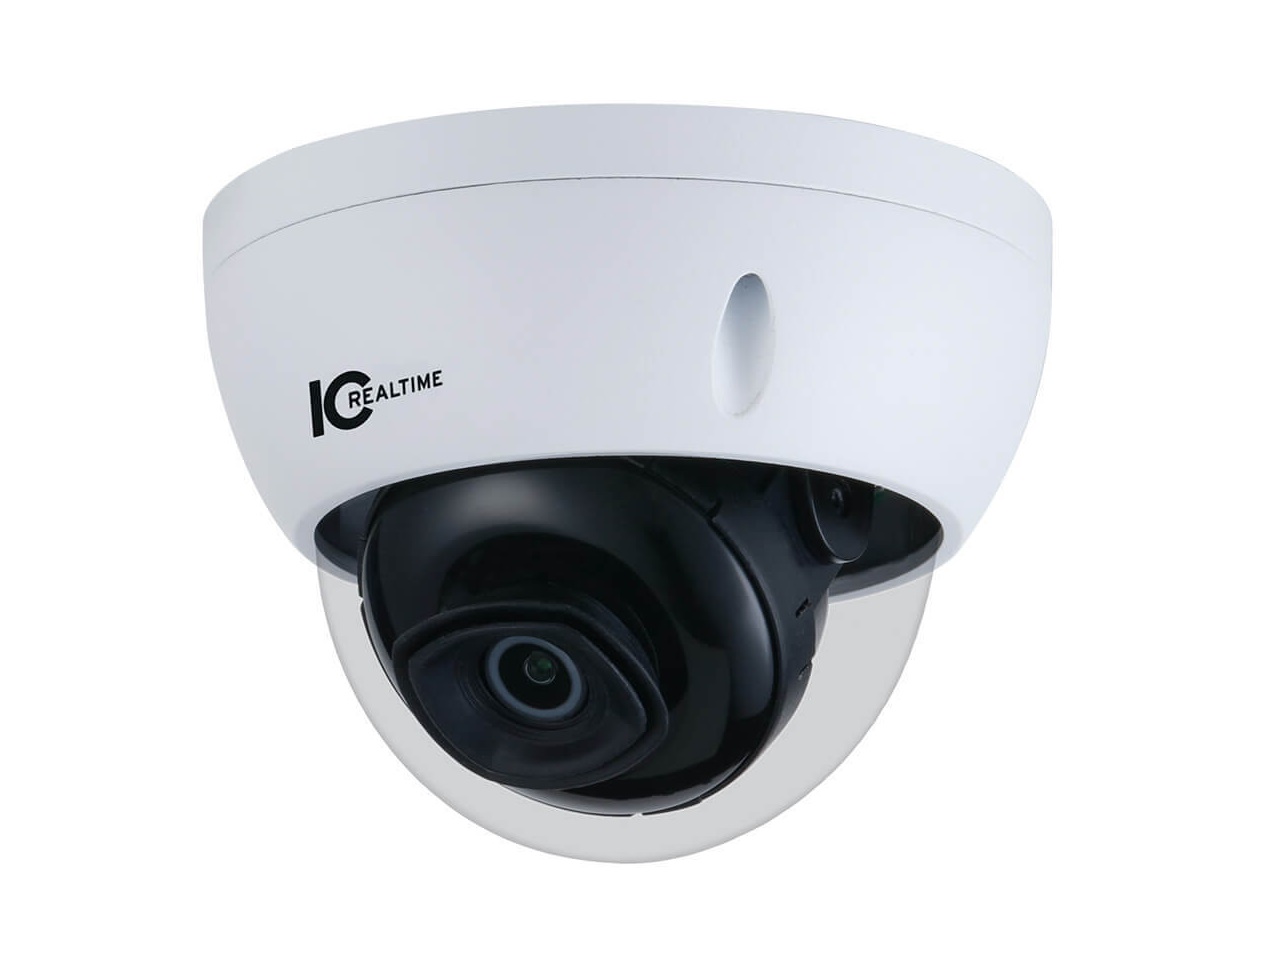 ICRealtime IPEG-D40F-IRW1 4MP IP Indoor/Outdoor Small Size Vandal Dome Camera/Fixed 2.8mm Lens/98ft Smart IR/PoE Capable